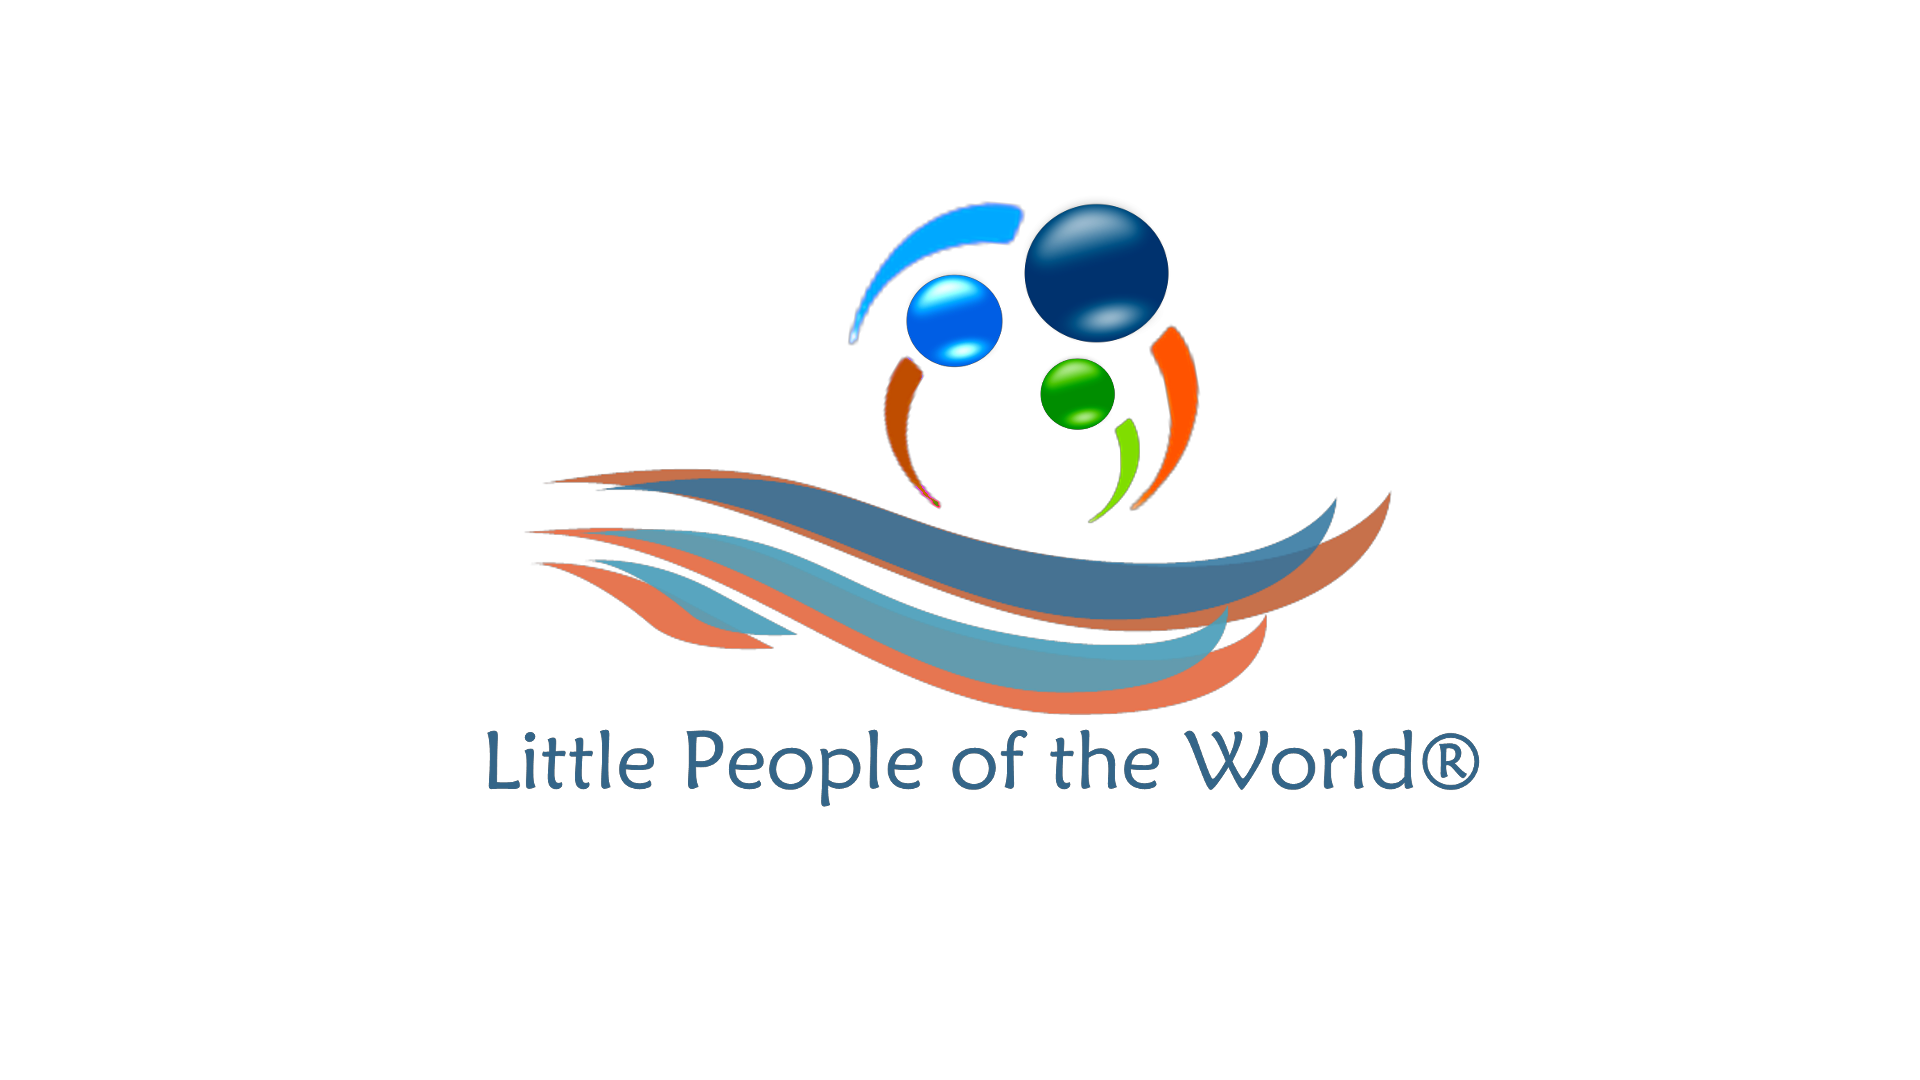 Little People of the World Corporation logo